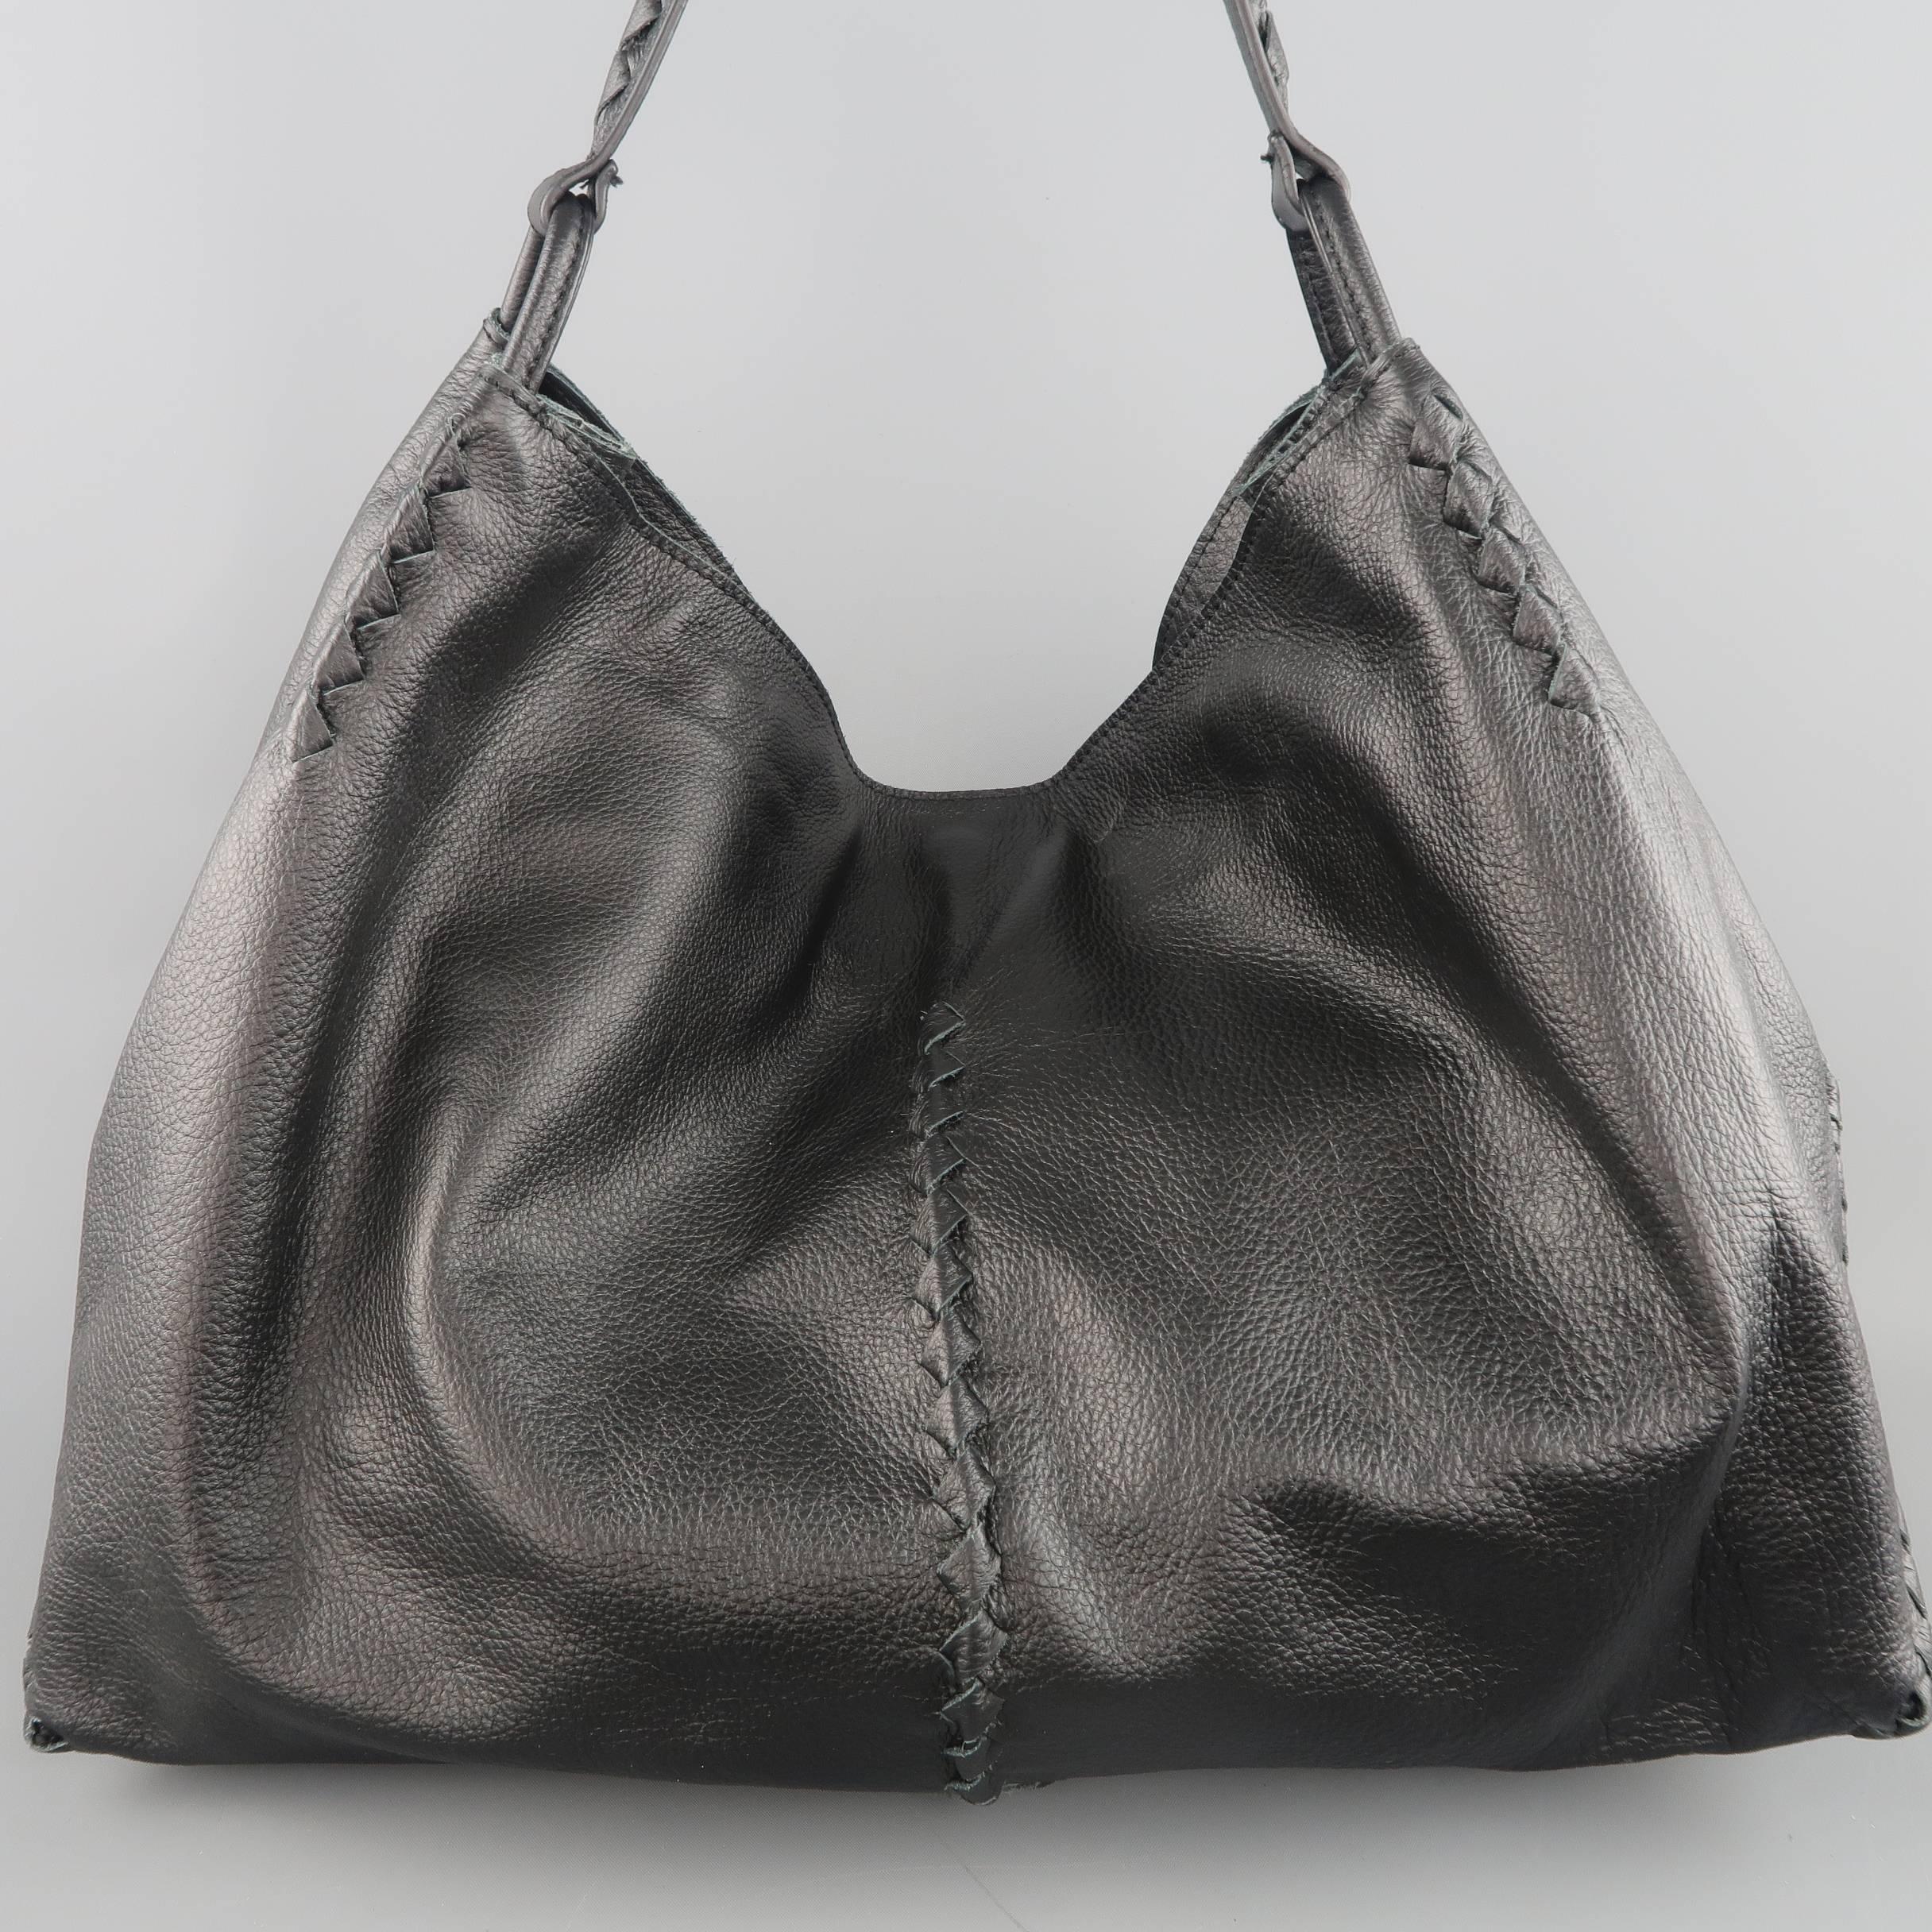 BOTTEGA VENETA hobo shoulder bag comes in black textured deer skin leather and features signature intrecciato woven piping, square angle corners, magnet closure, and woven shoulder strap. Made in Italy.
 
Retails at $2,050.00
Excellent Pre-Owned